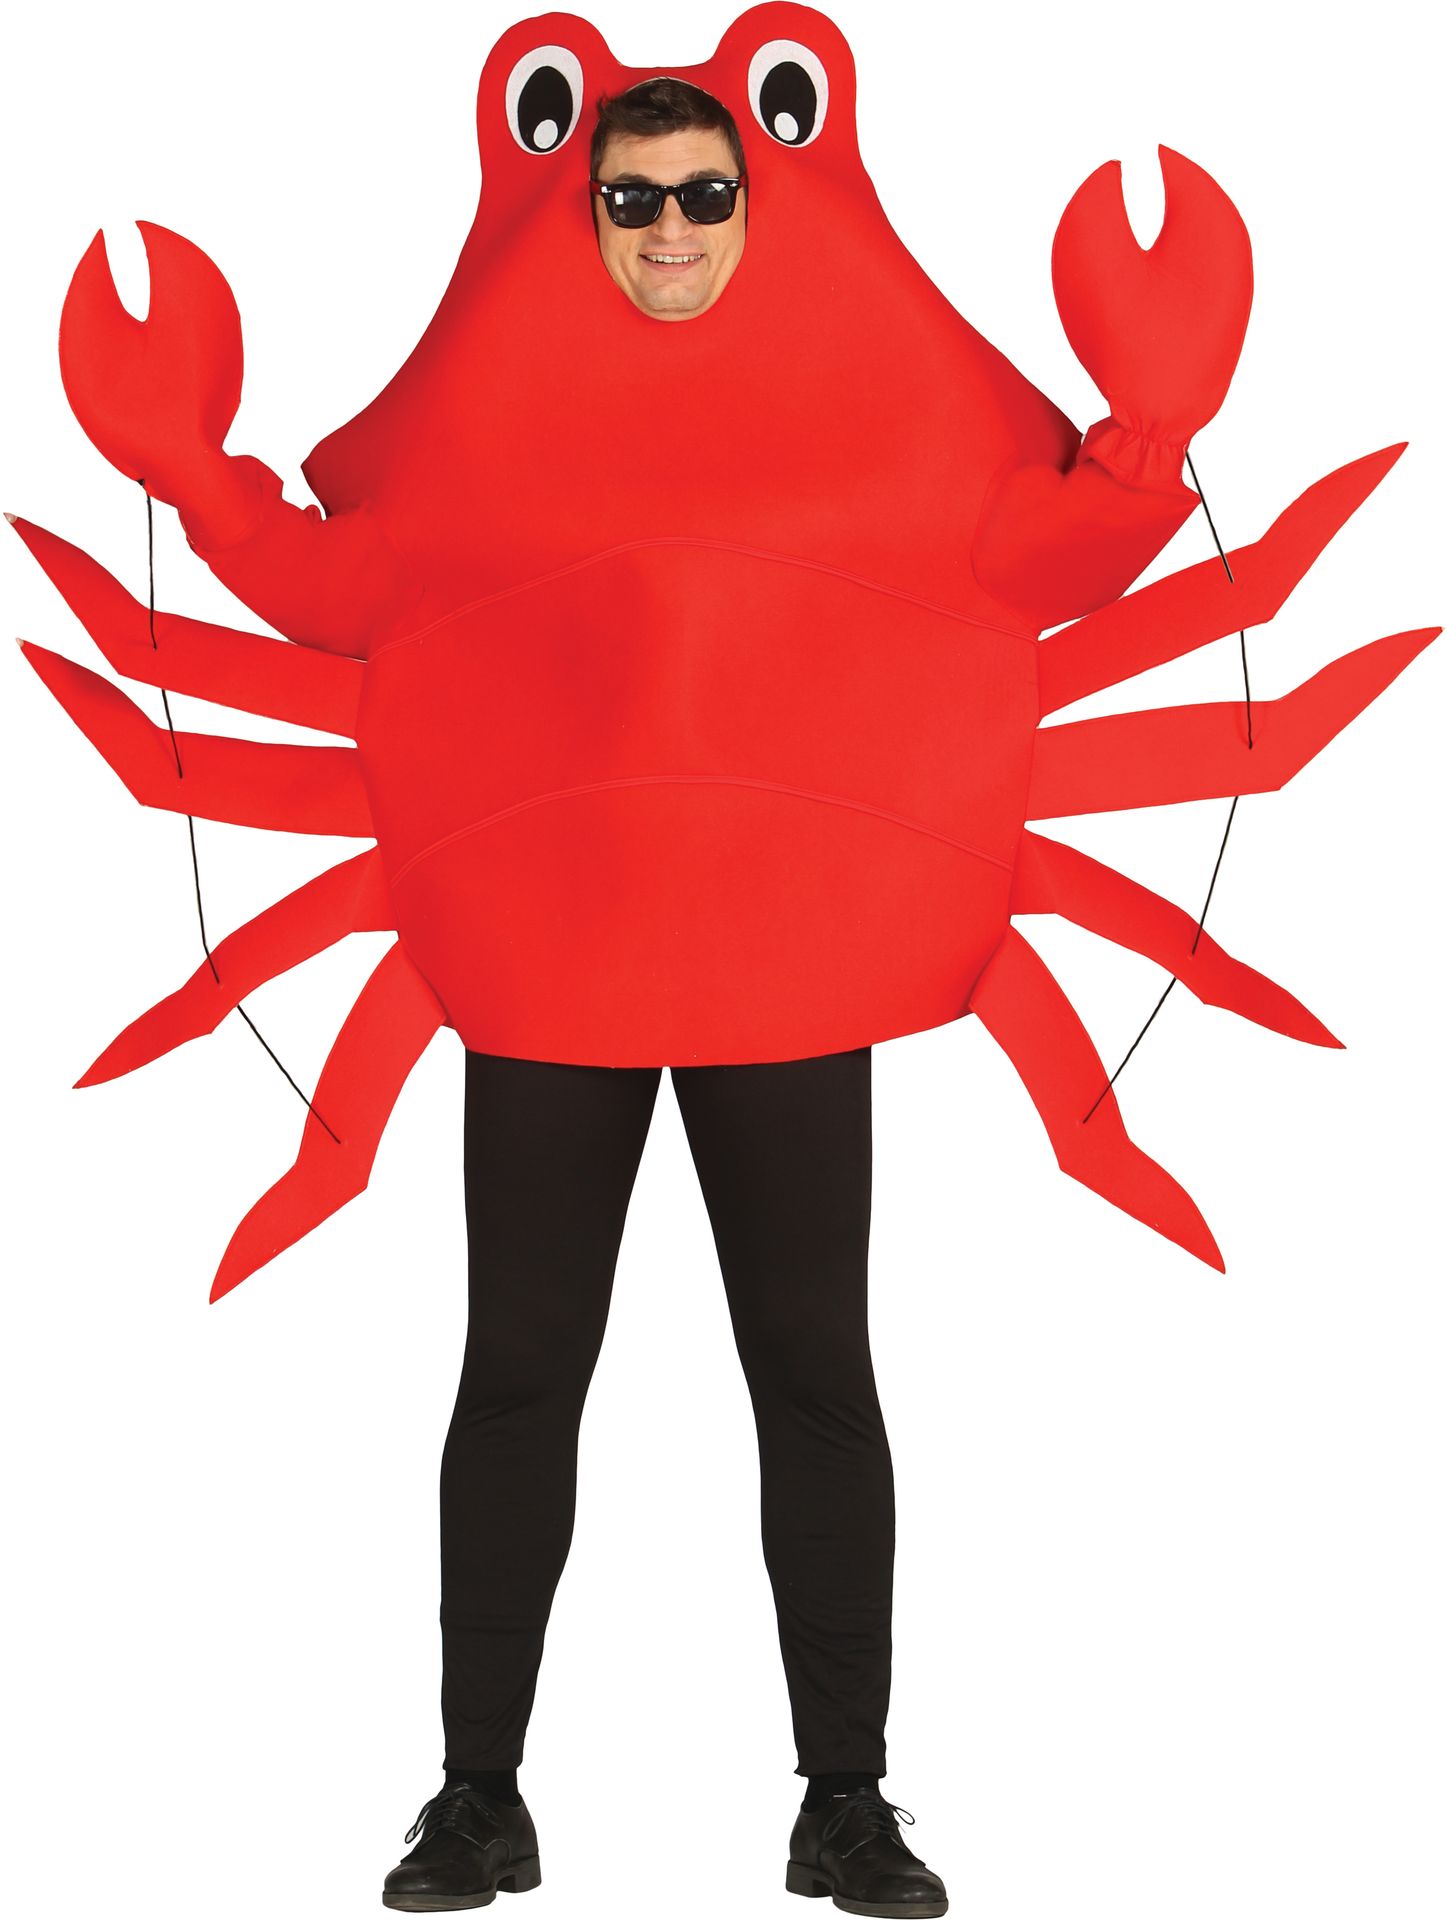 Rode krab carnaval outfit